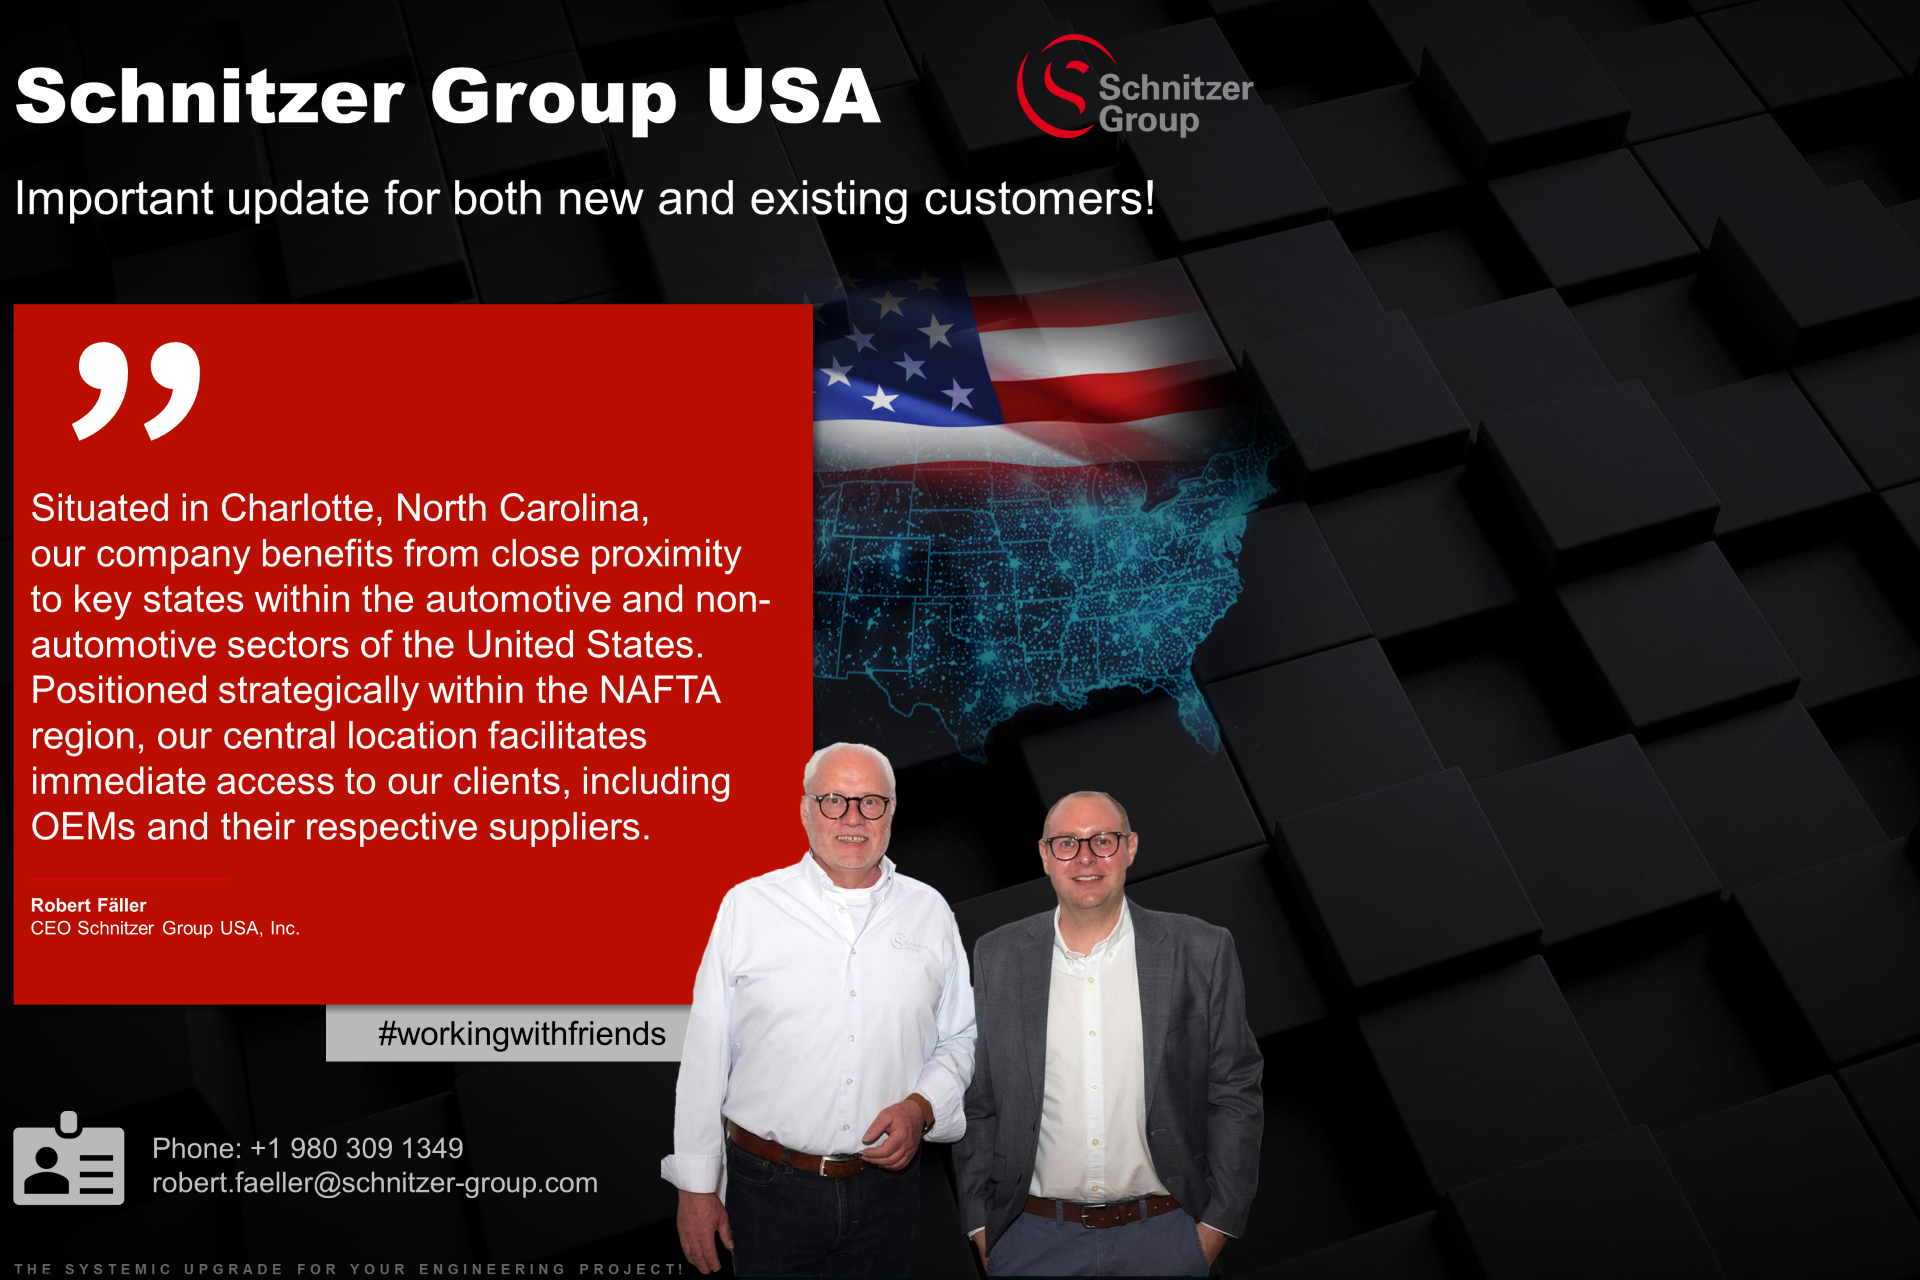 Schnitzer Group USA expand services